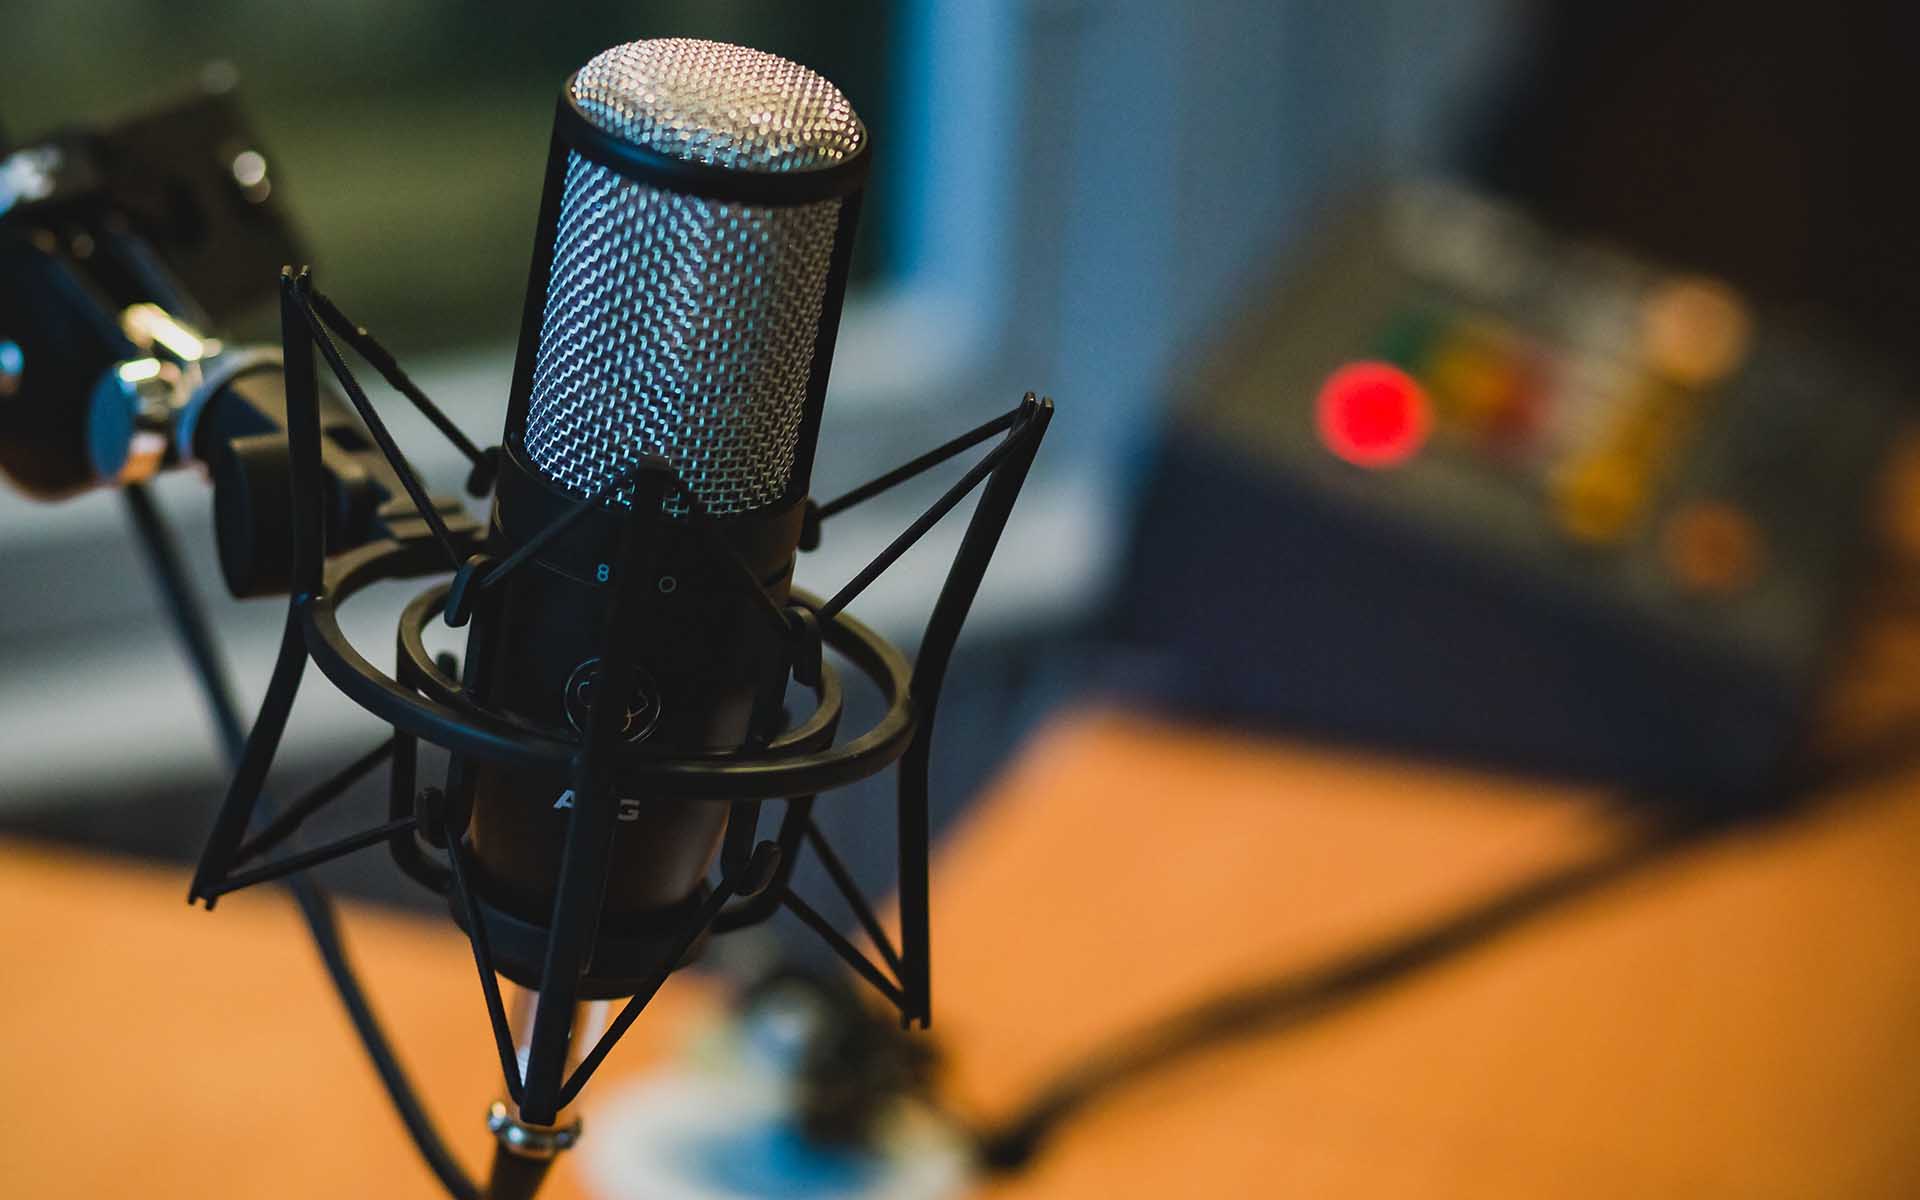 Top 7 Cryptocurrency Podcasts That You Can’t Afford to Miss